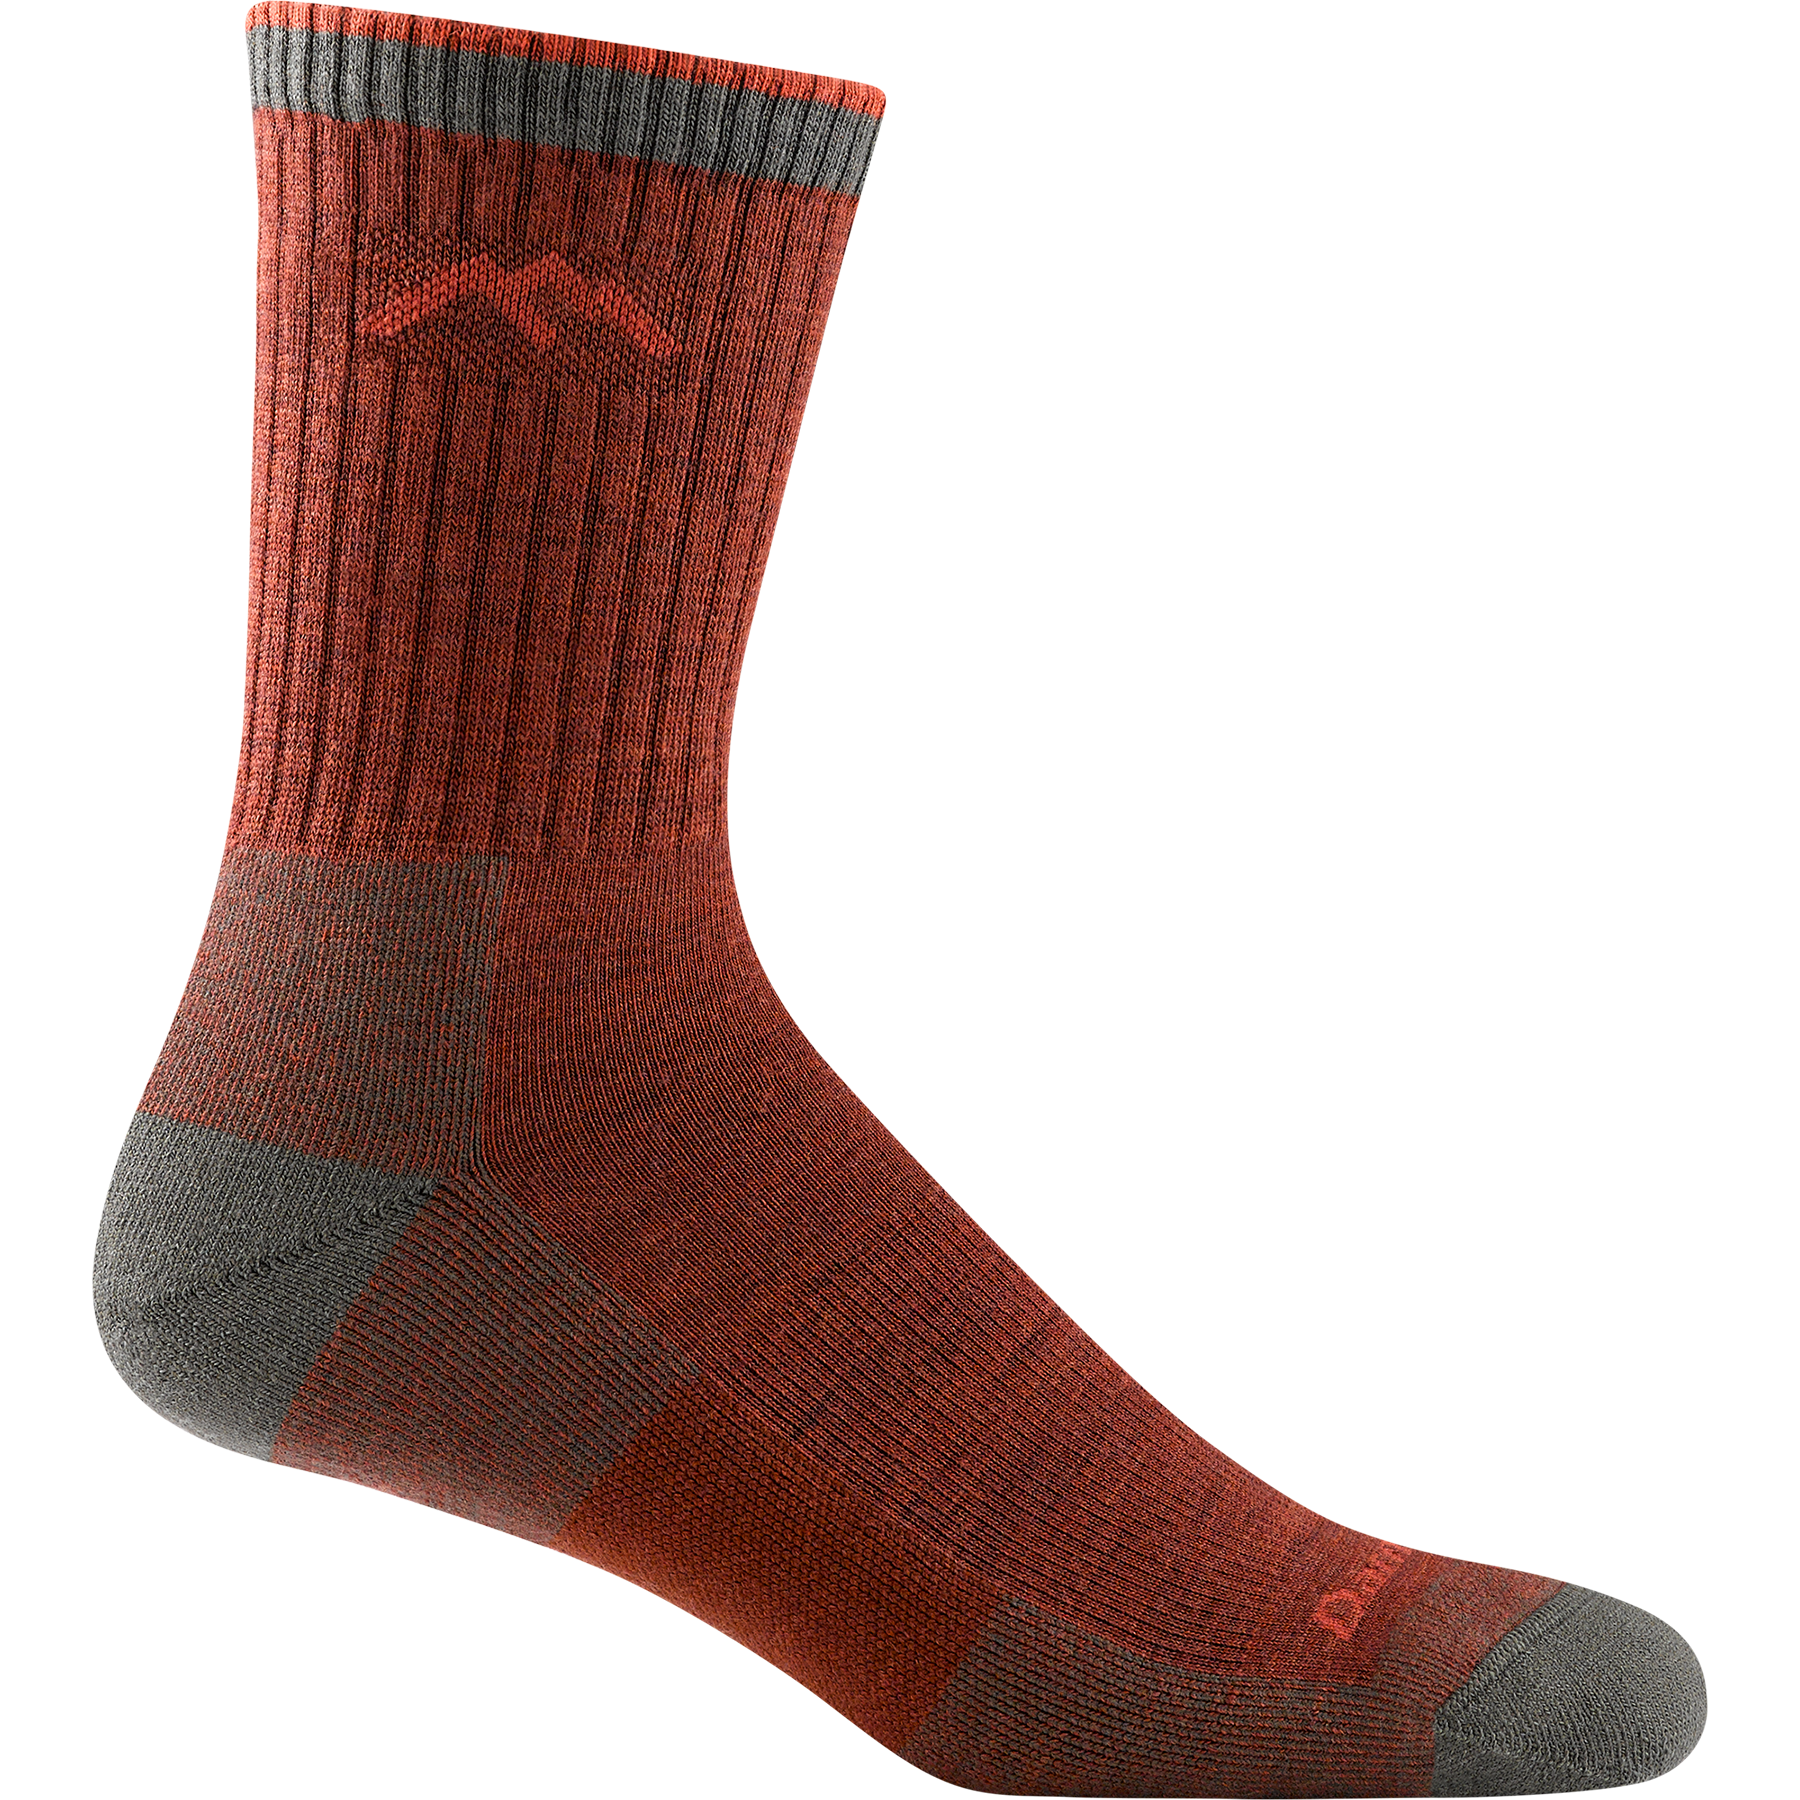 Darn tough rust sock with rust mountain outline detail, gray toe and heel